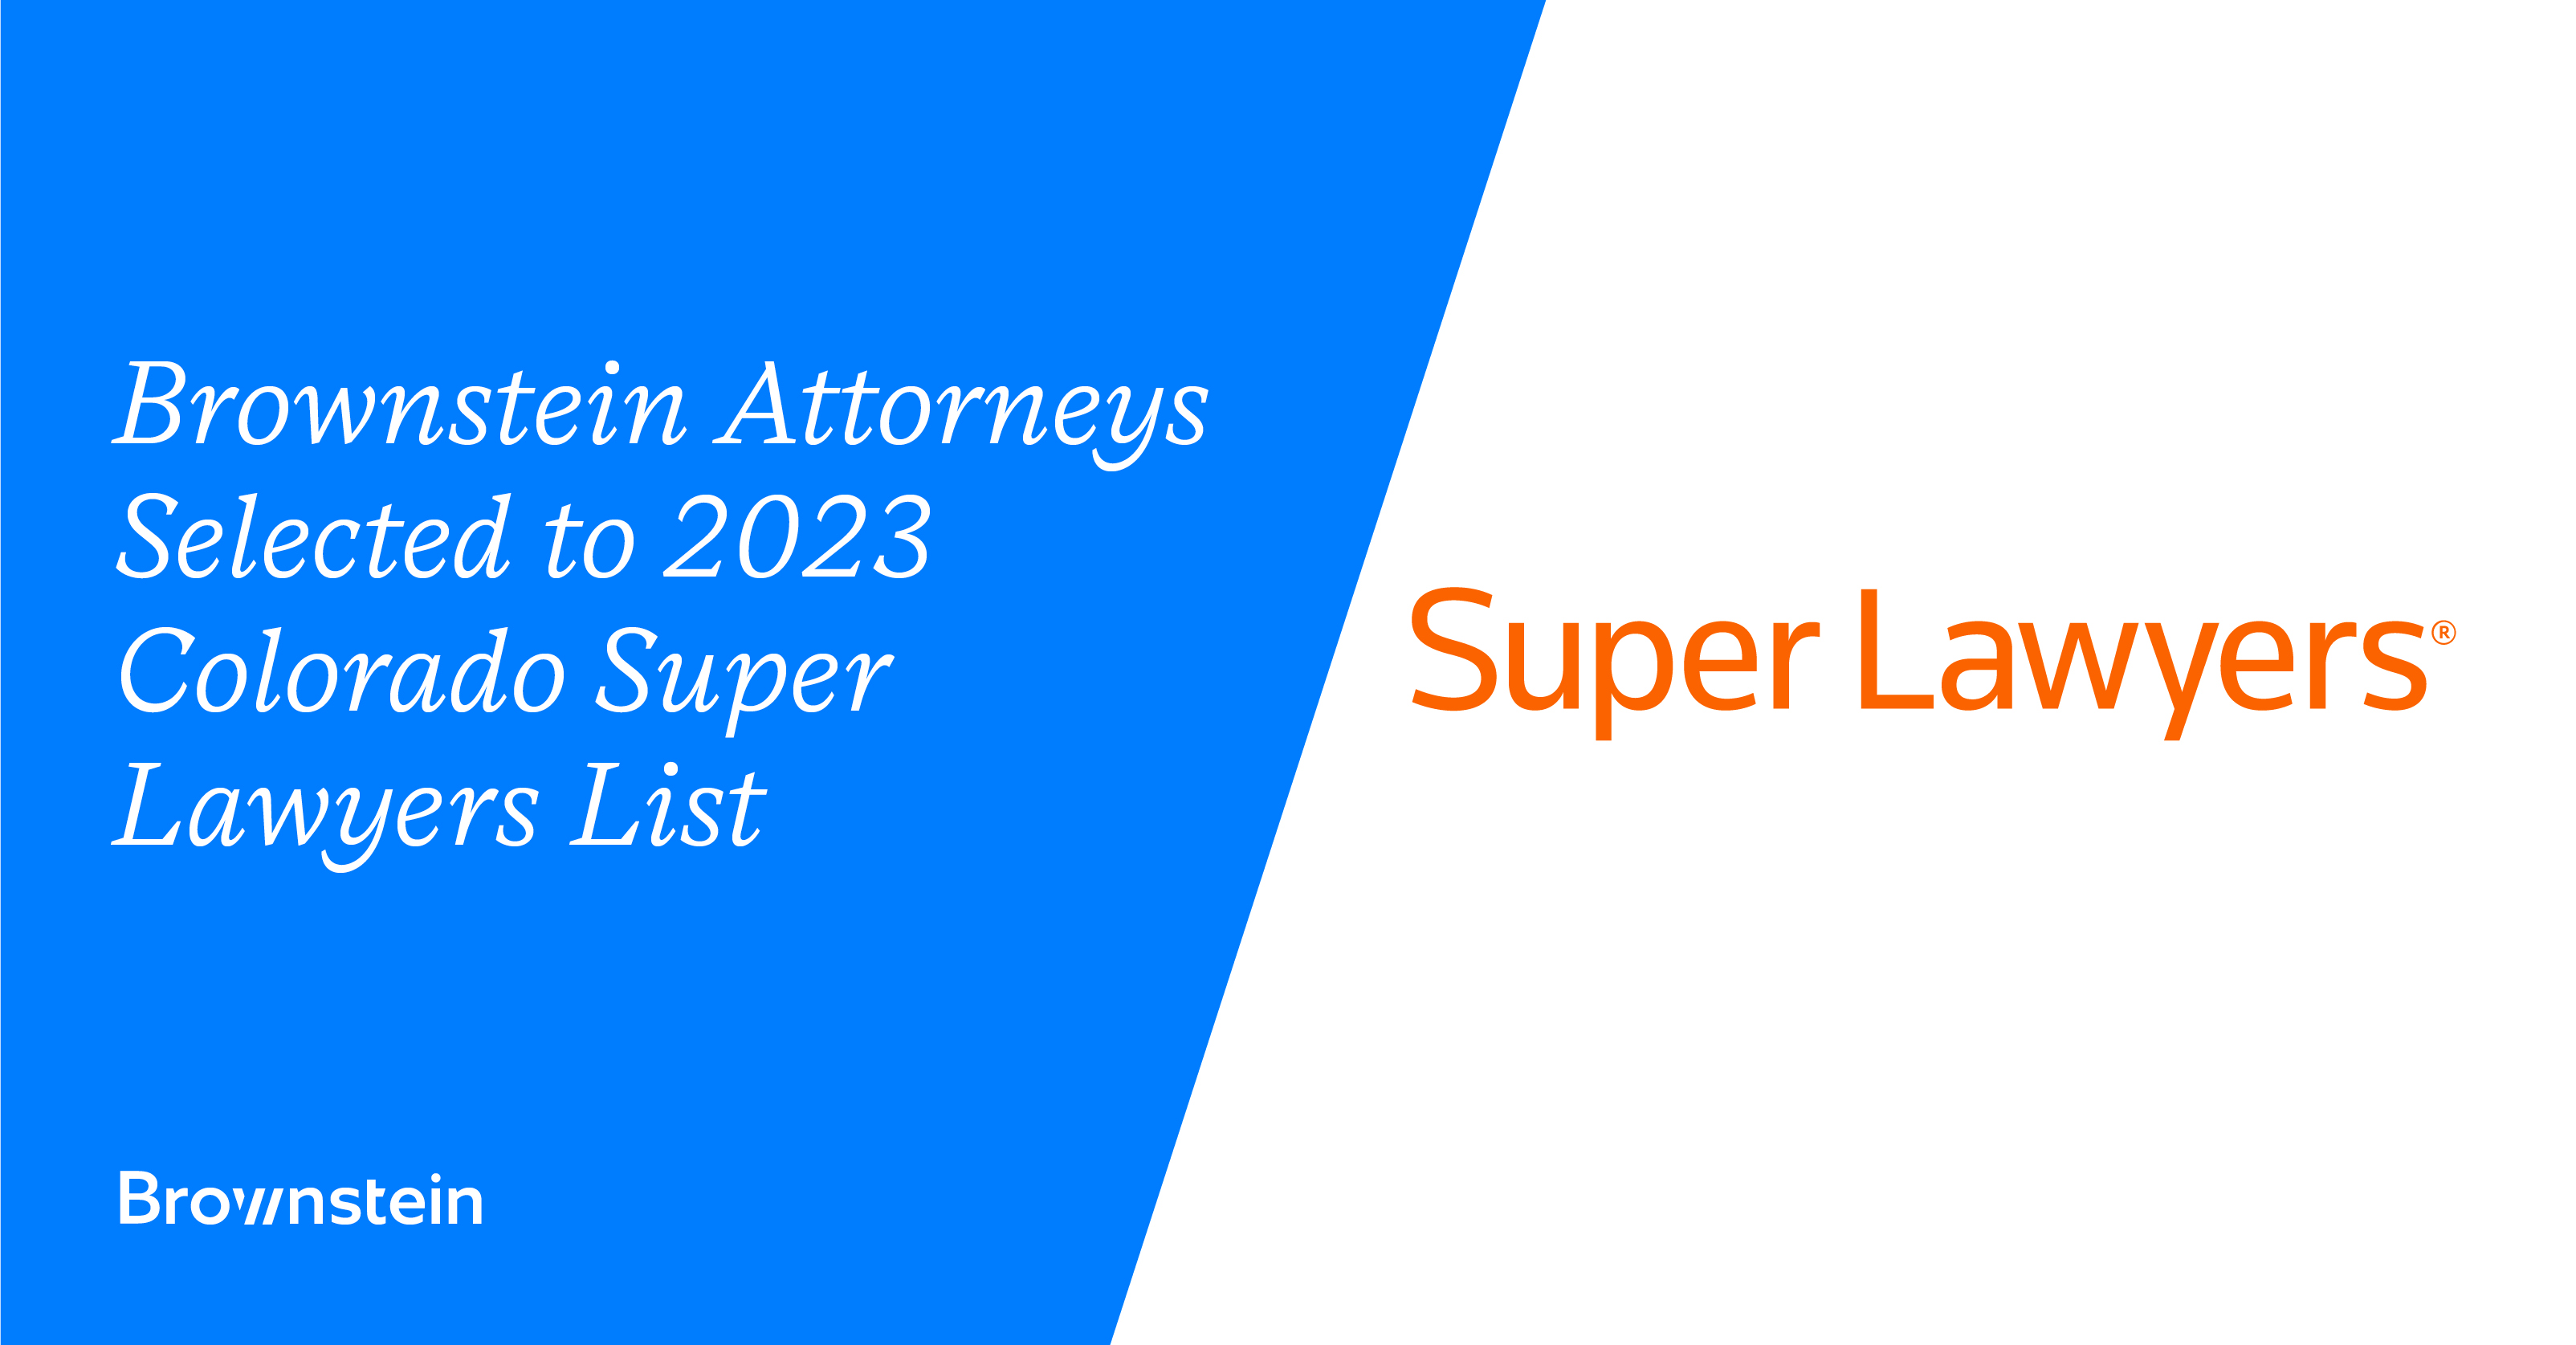 Brownstein Attorneys Selected to 2023 Colorado Super Lawyers List